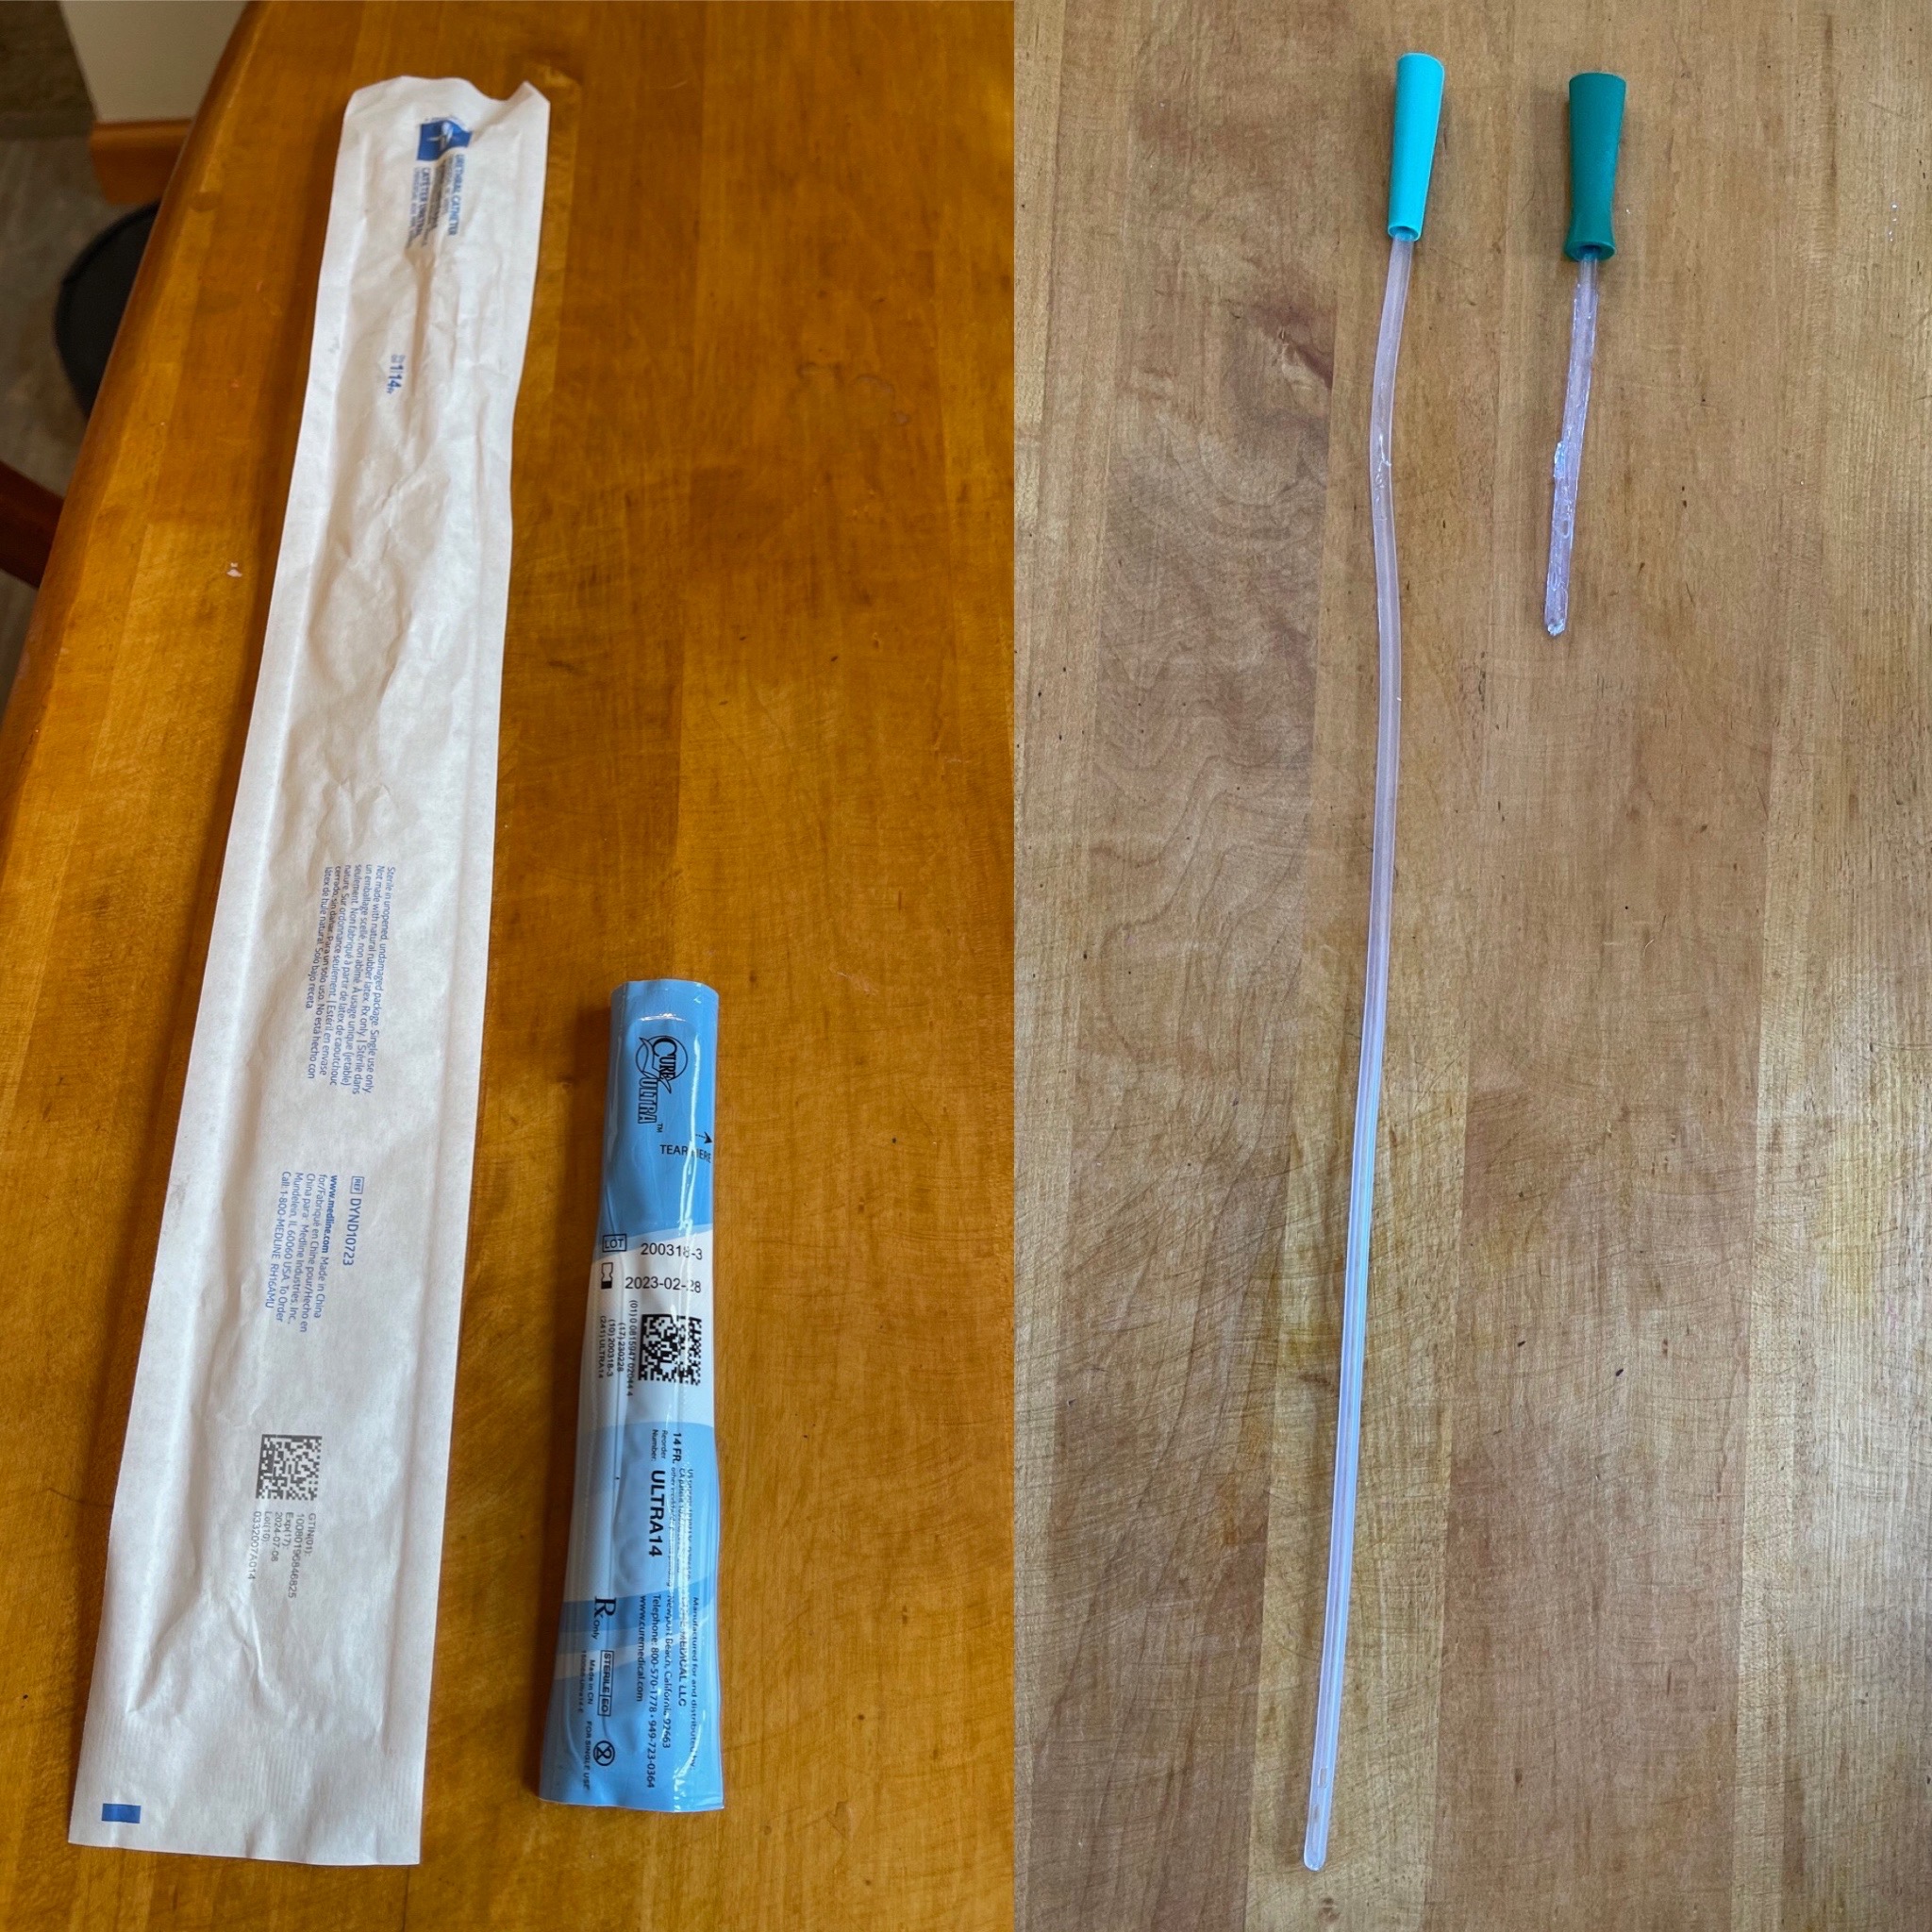 Two catheters side by side on a table. The unisex catheter is more than three times as long as Laura's normal catheter.